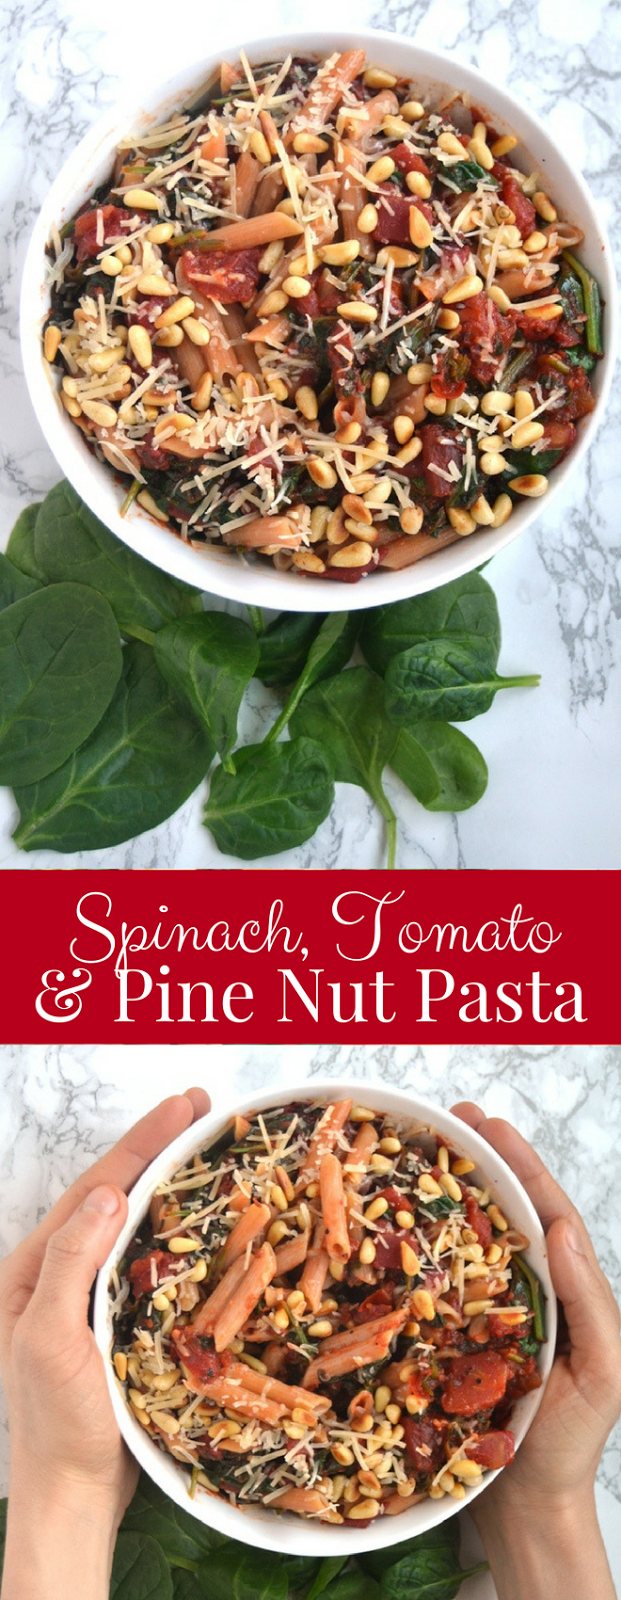 Spinach, Tomato and Pine Nut Pasta takes 15 minutes to make and is loaded with sauteed spinach and fire roasted tomatoes, toasted pine nuts and shredded Parmesan cheese!  www.nutritionistreviews.com